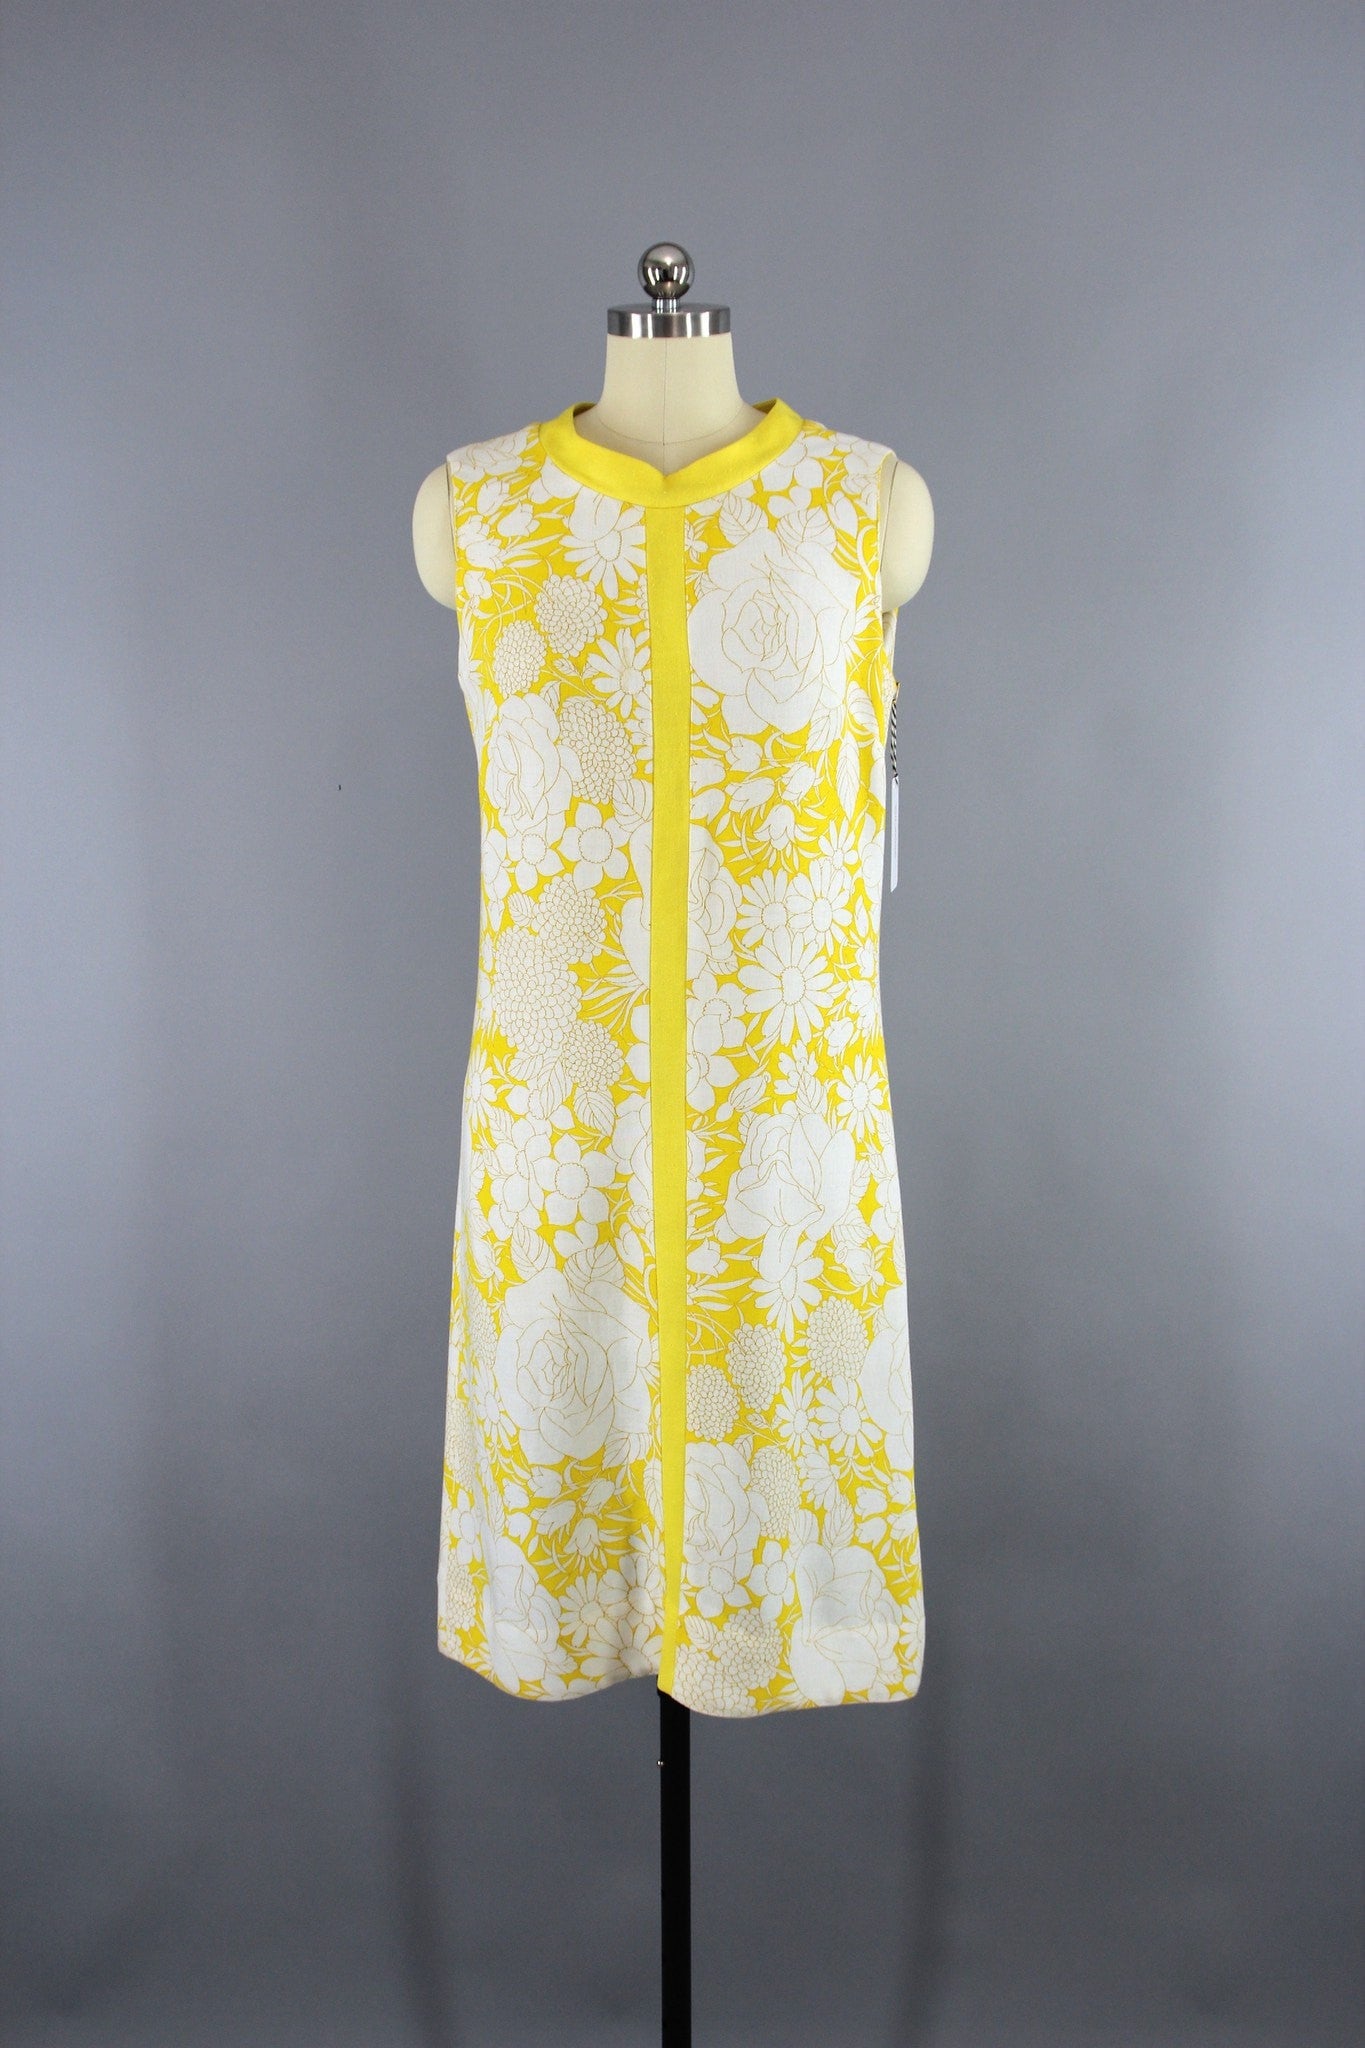 Vintage 1960s Shift Dress / Yellow Floral Print - ThisBlueBird